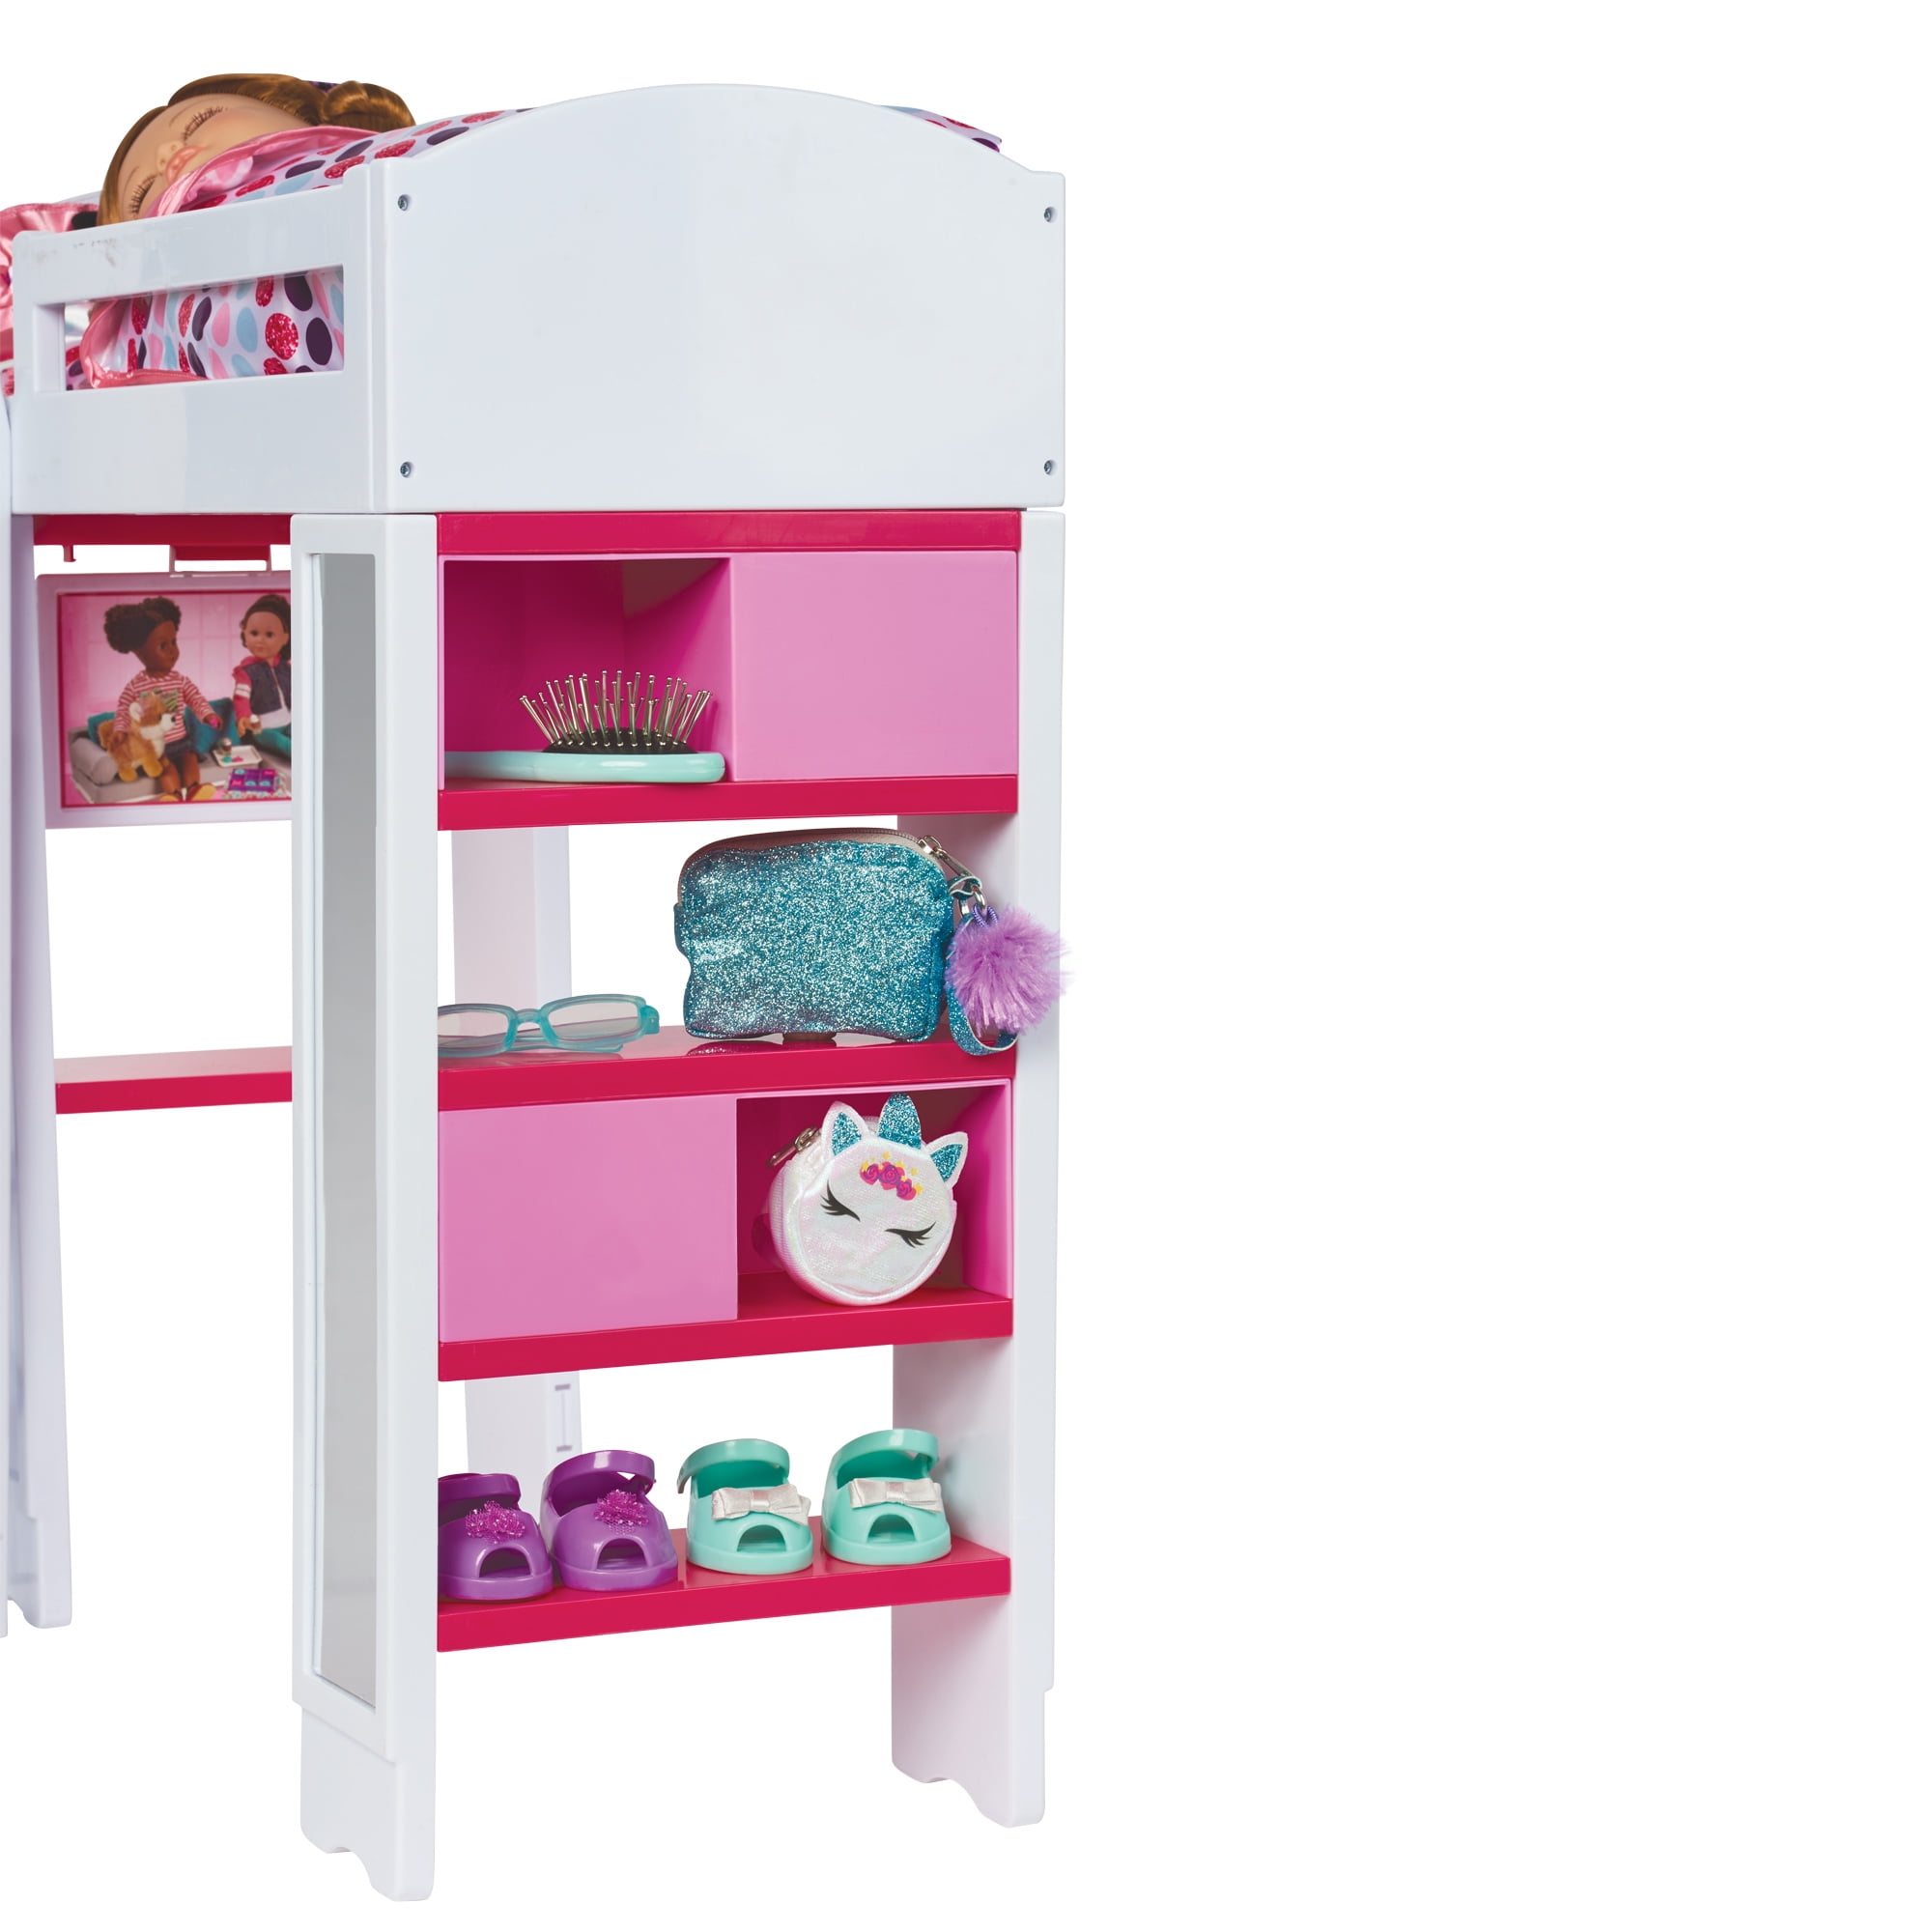 Badger Basket Doll Armoire Bunk Bed With Ladder White Pink Fits American Girl My Life As Most 18 Dolls Walmart Com Walmart Com